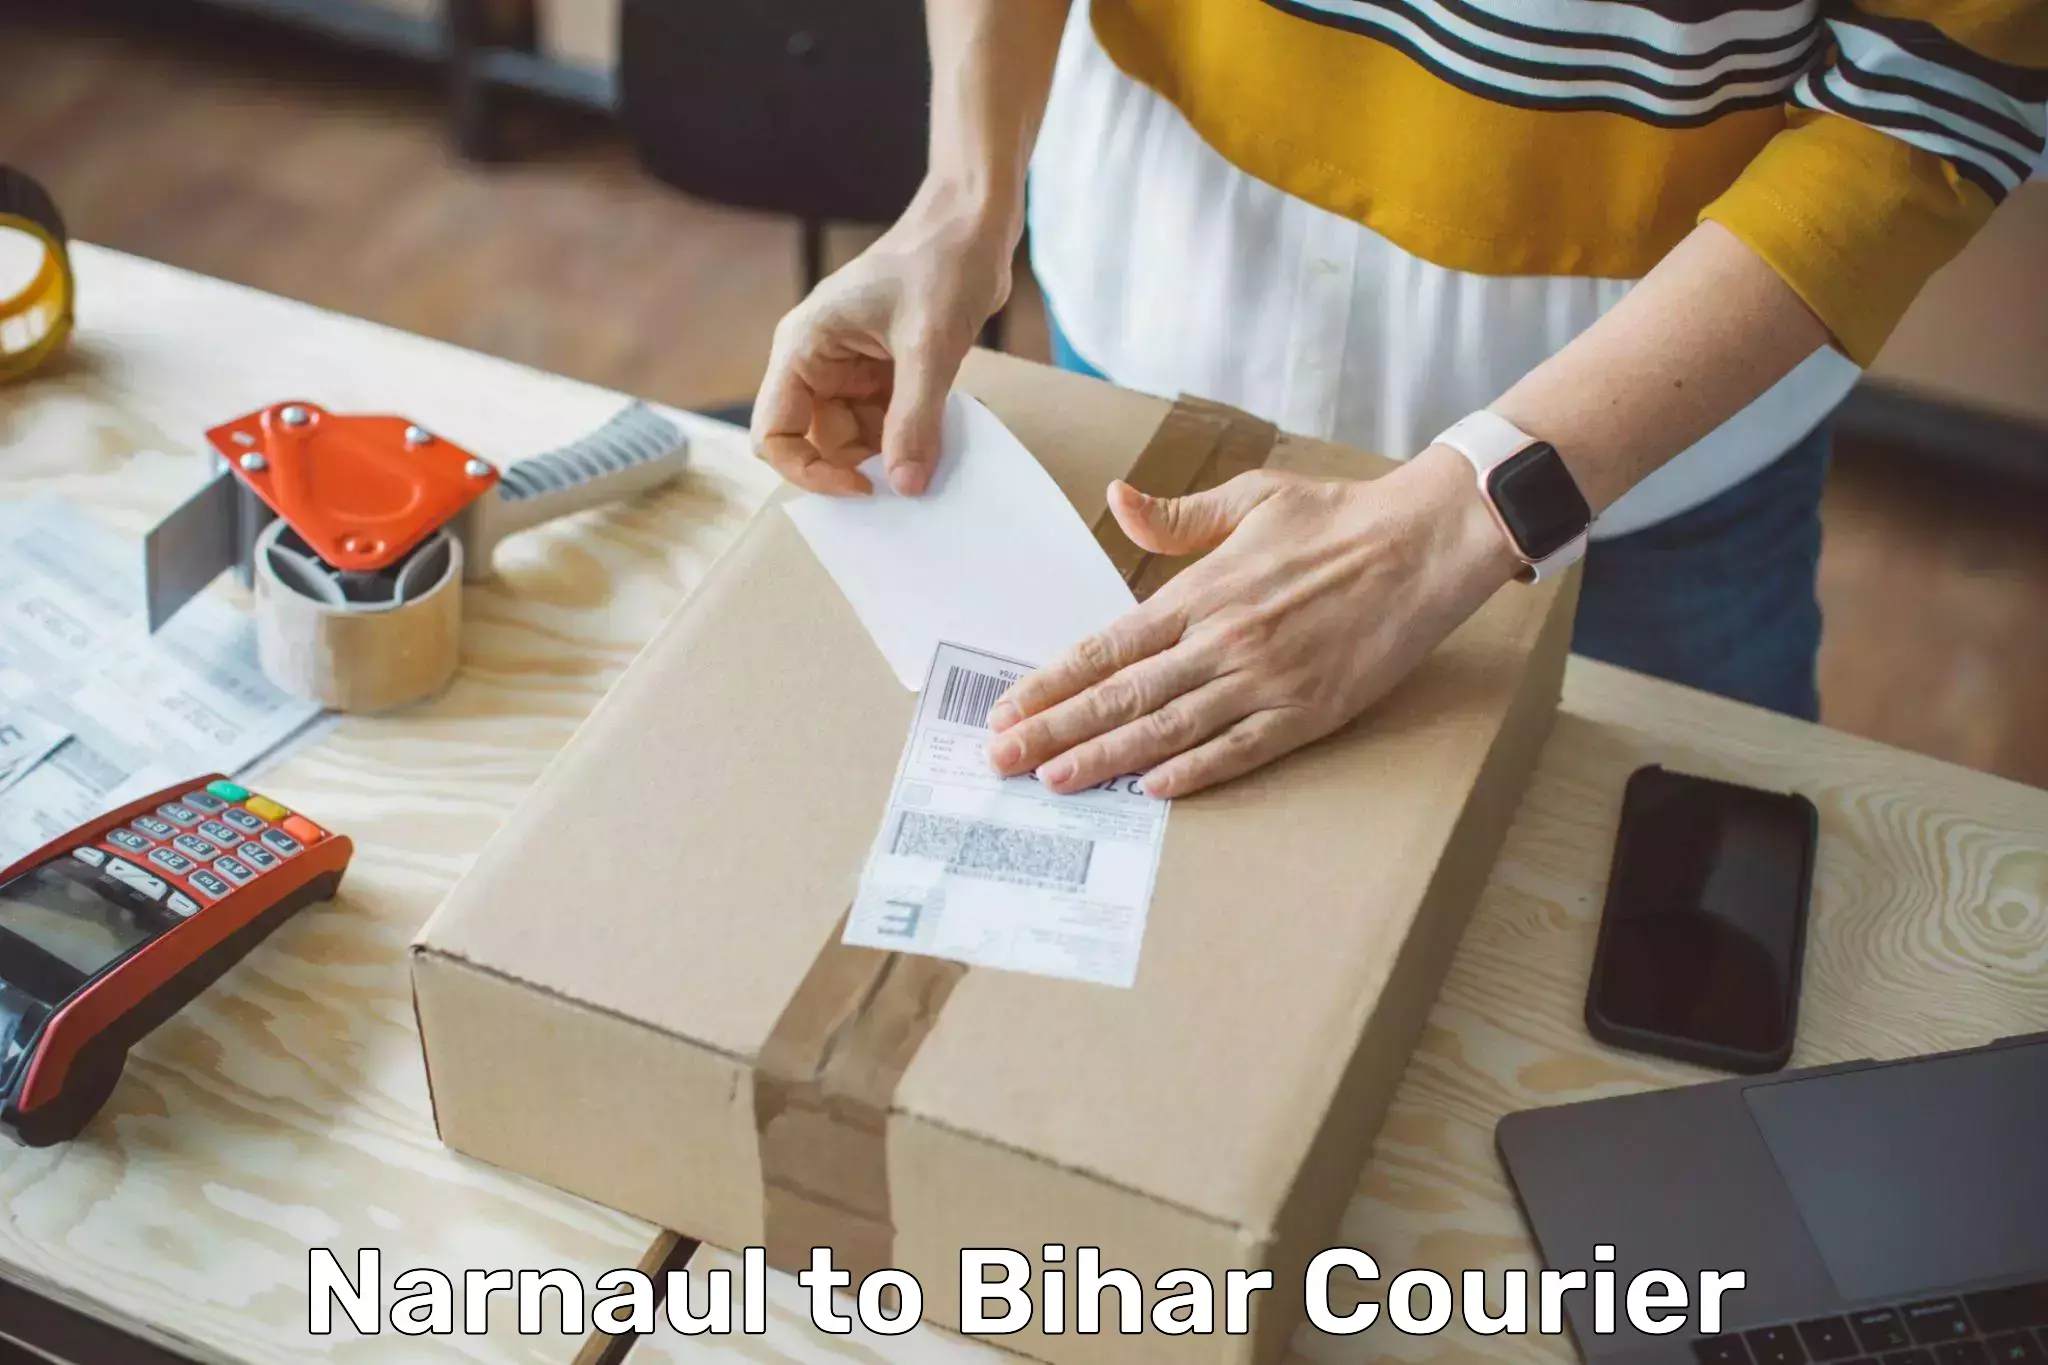 State-of-the-art courier technology Narnaul to Bihar